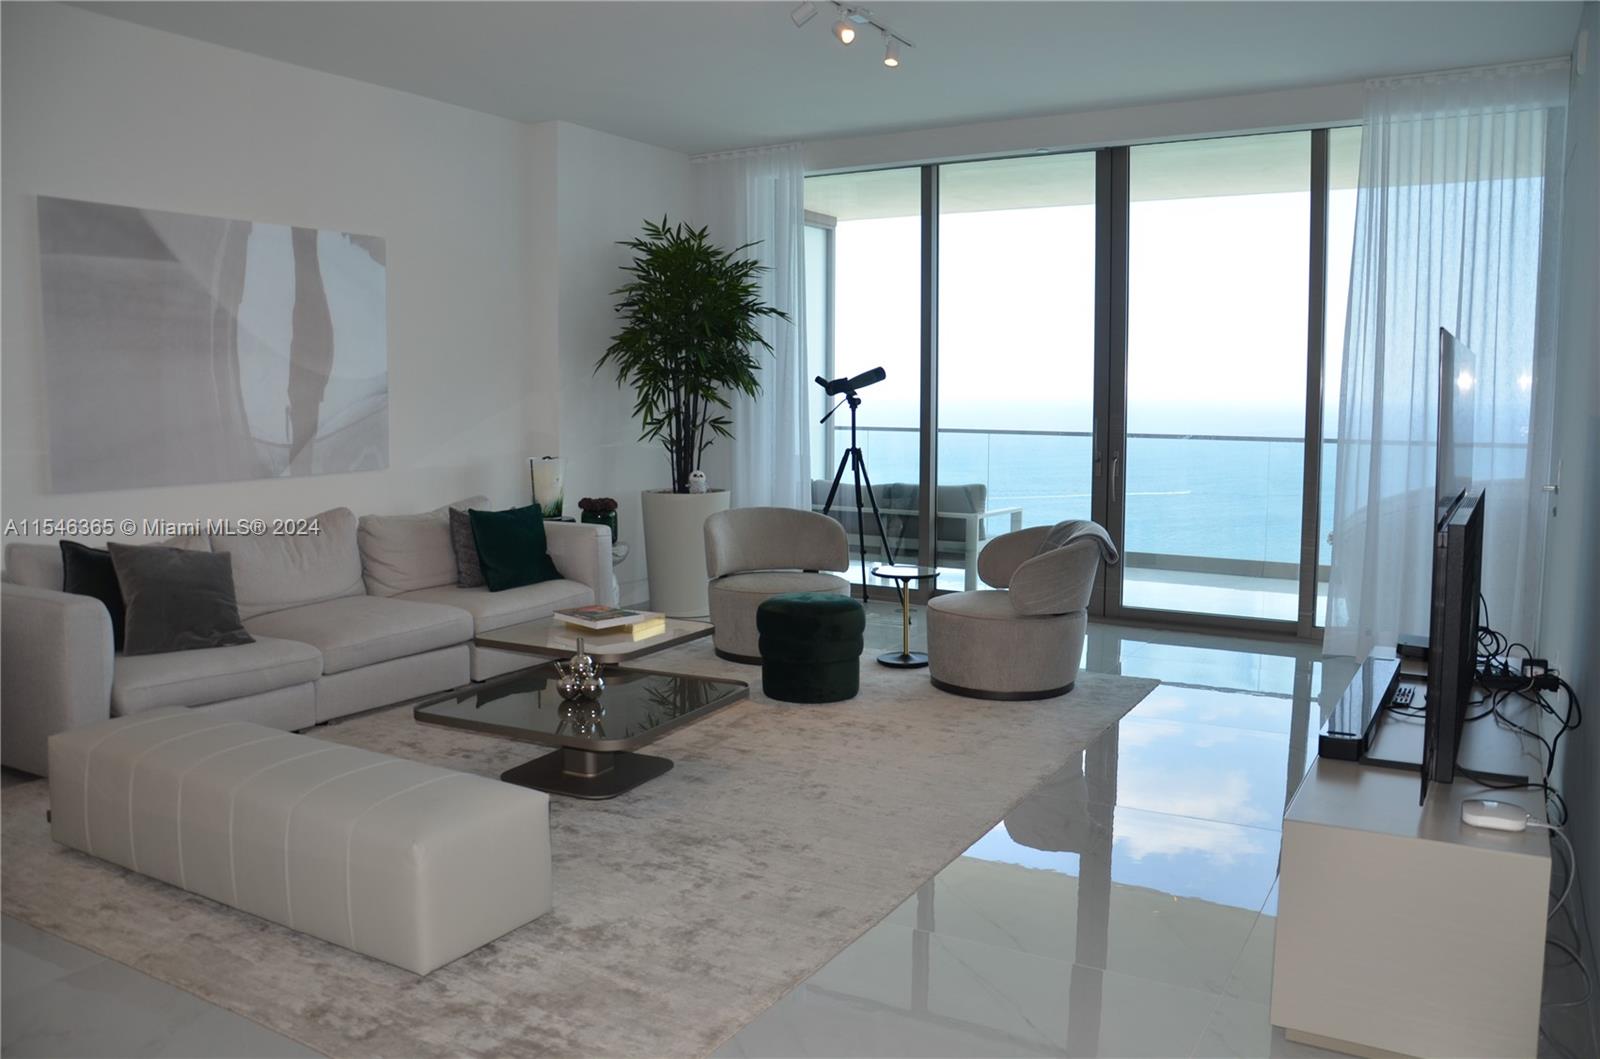 Enjoy this amaizing apartment in Armani Casa located in the heart of Sunny 
isles.Exquisite 3 bed + den apartment stuns with panoramic ocean & city views through 10-foot ceilings & expansive windows. It has luxuries amenities. Ask for 3 to 6 moths rent